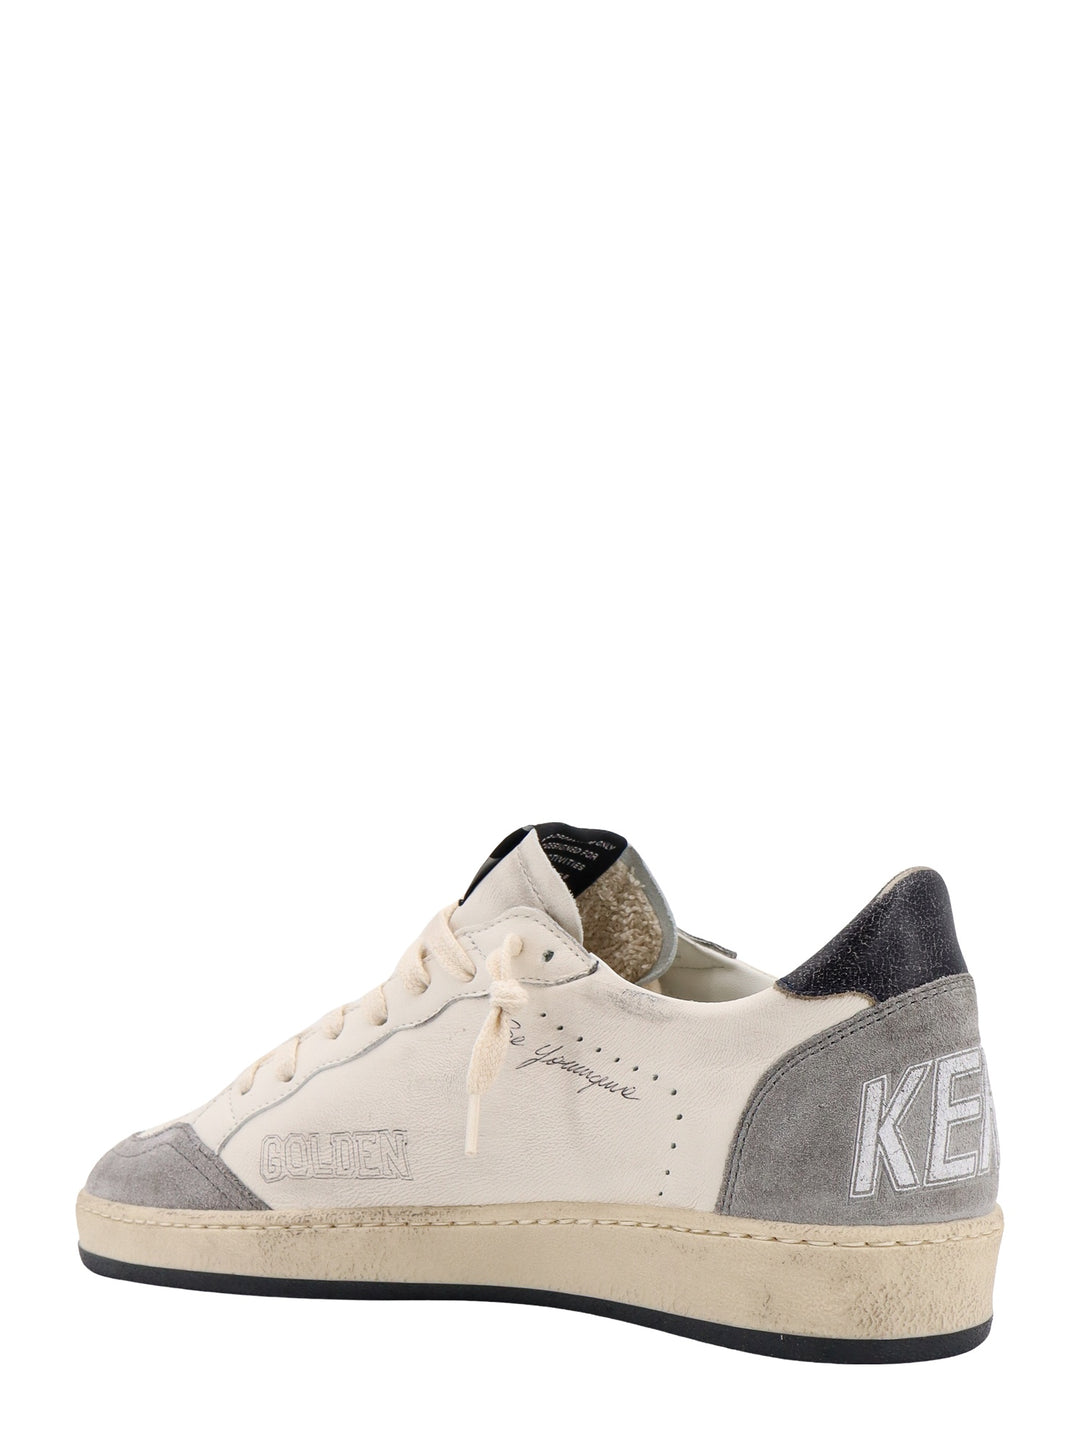 Sneakers in pelle e suede con stampe